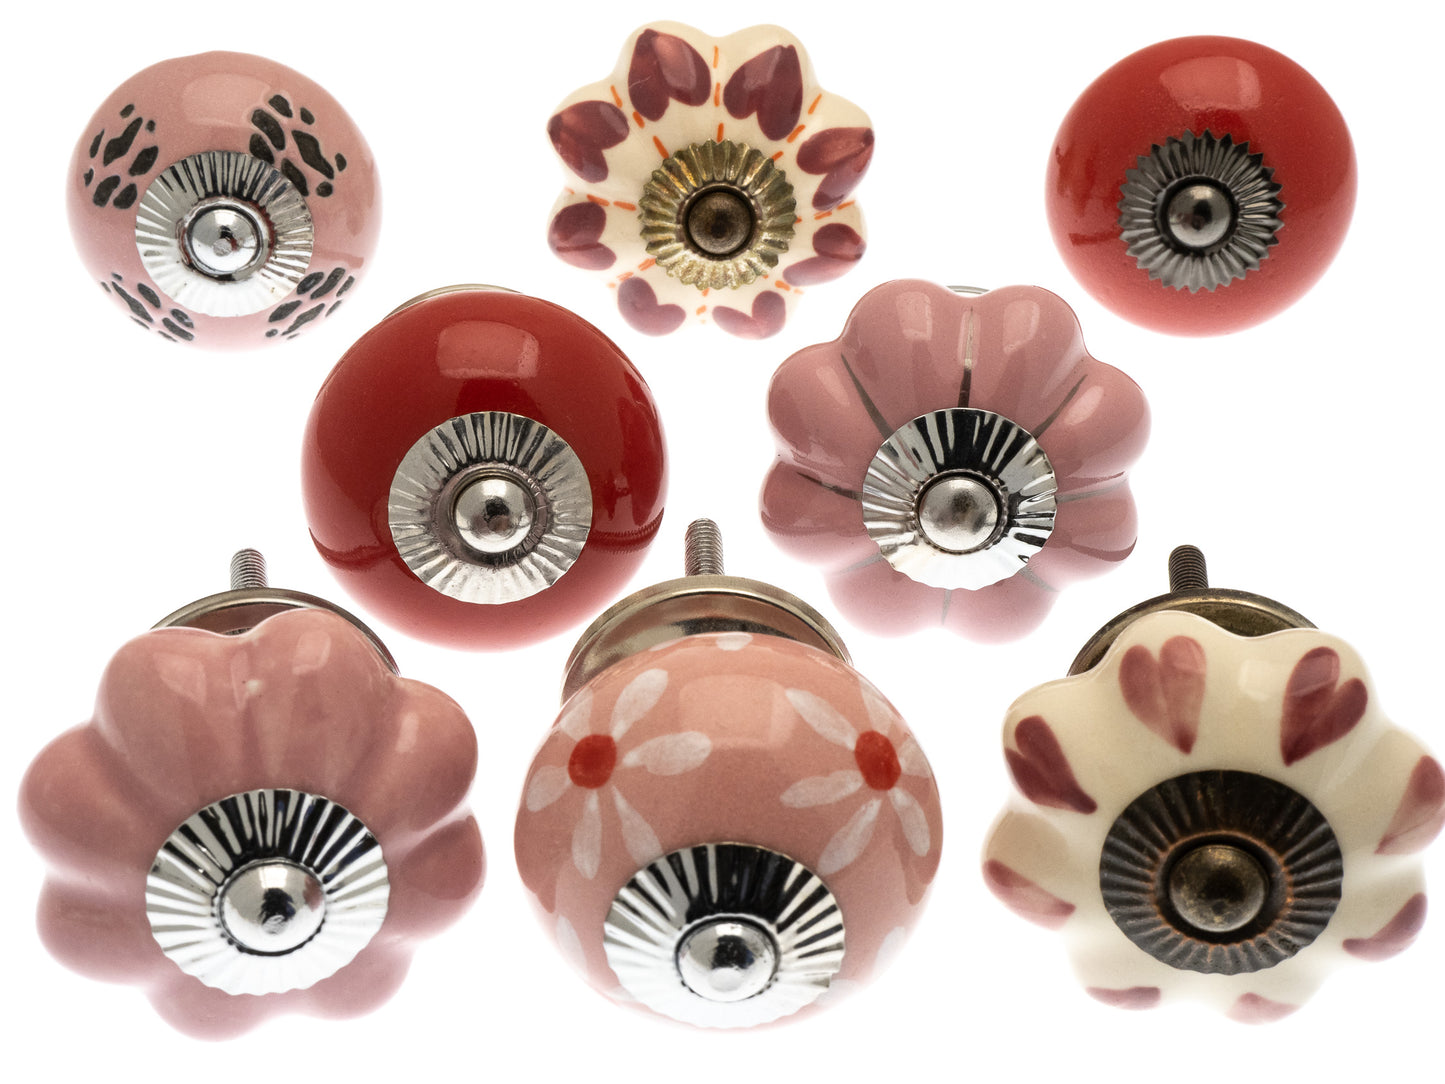 Ceramic Door Knobs - 8 Pretty Pink, Red Hearts and Daisies